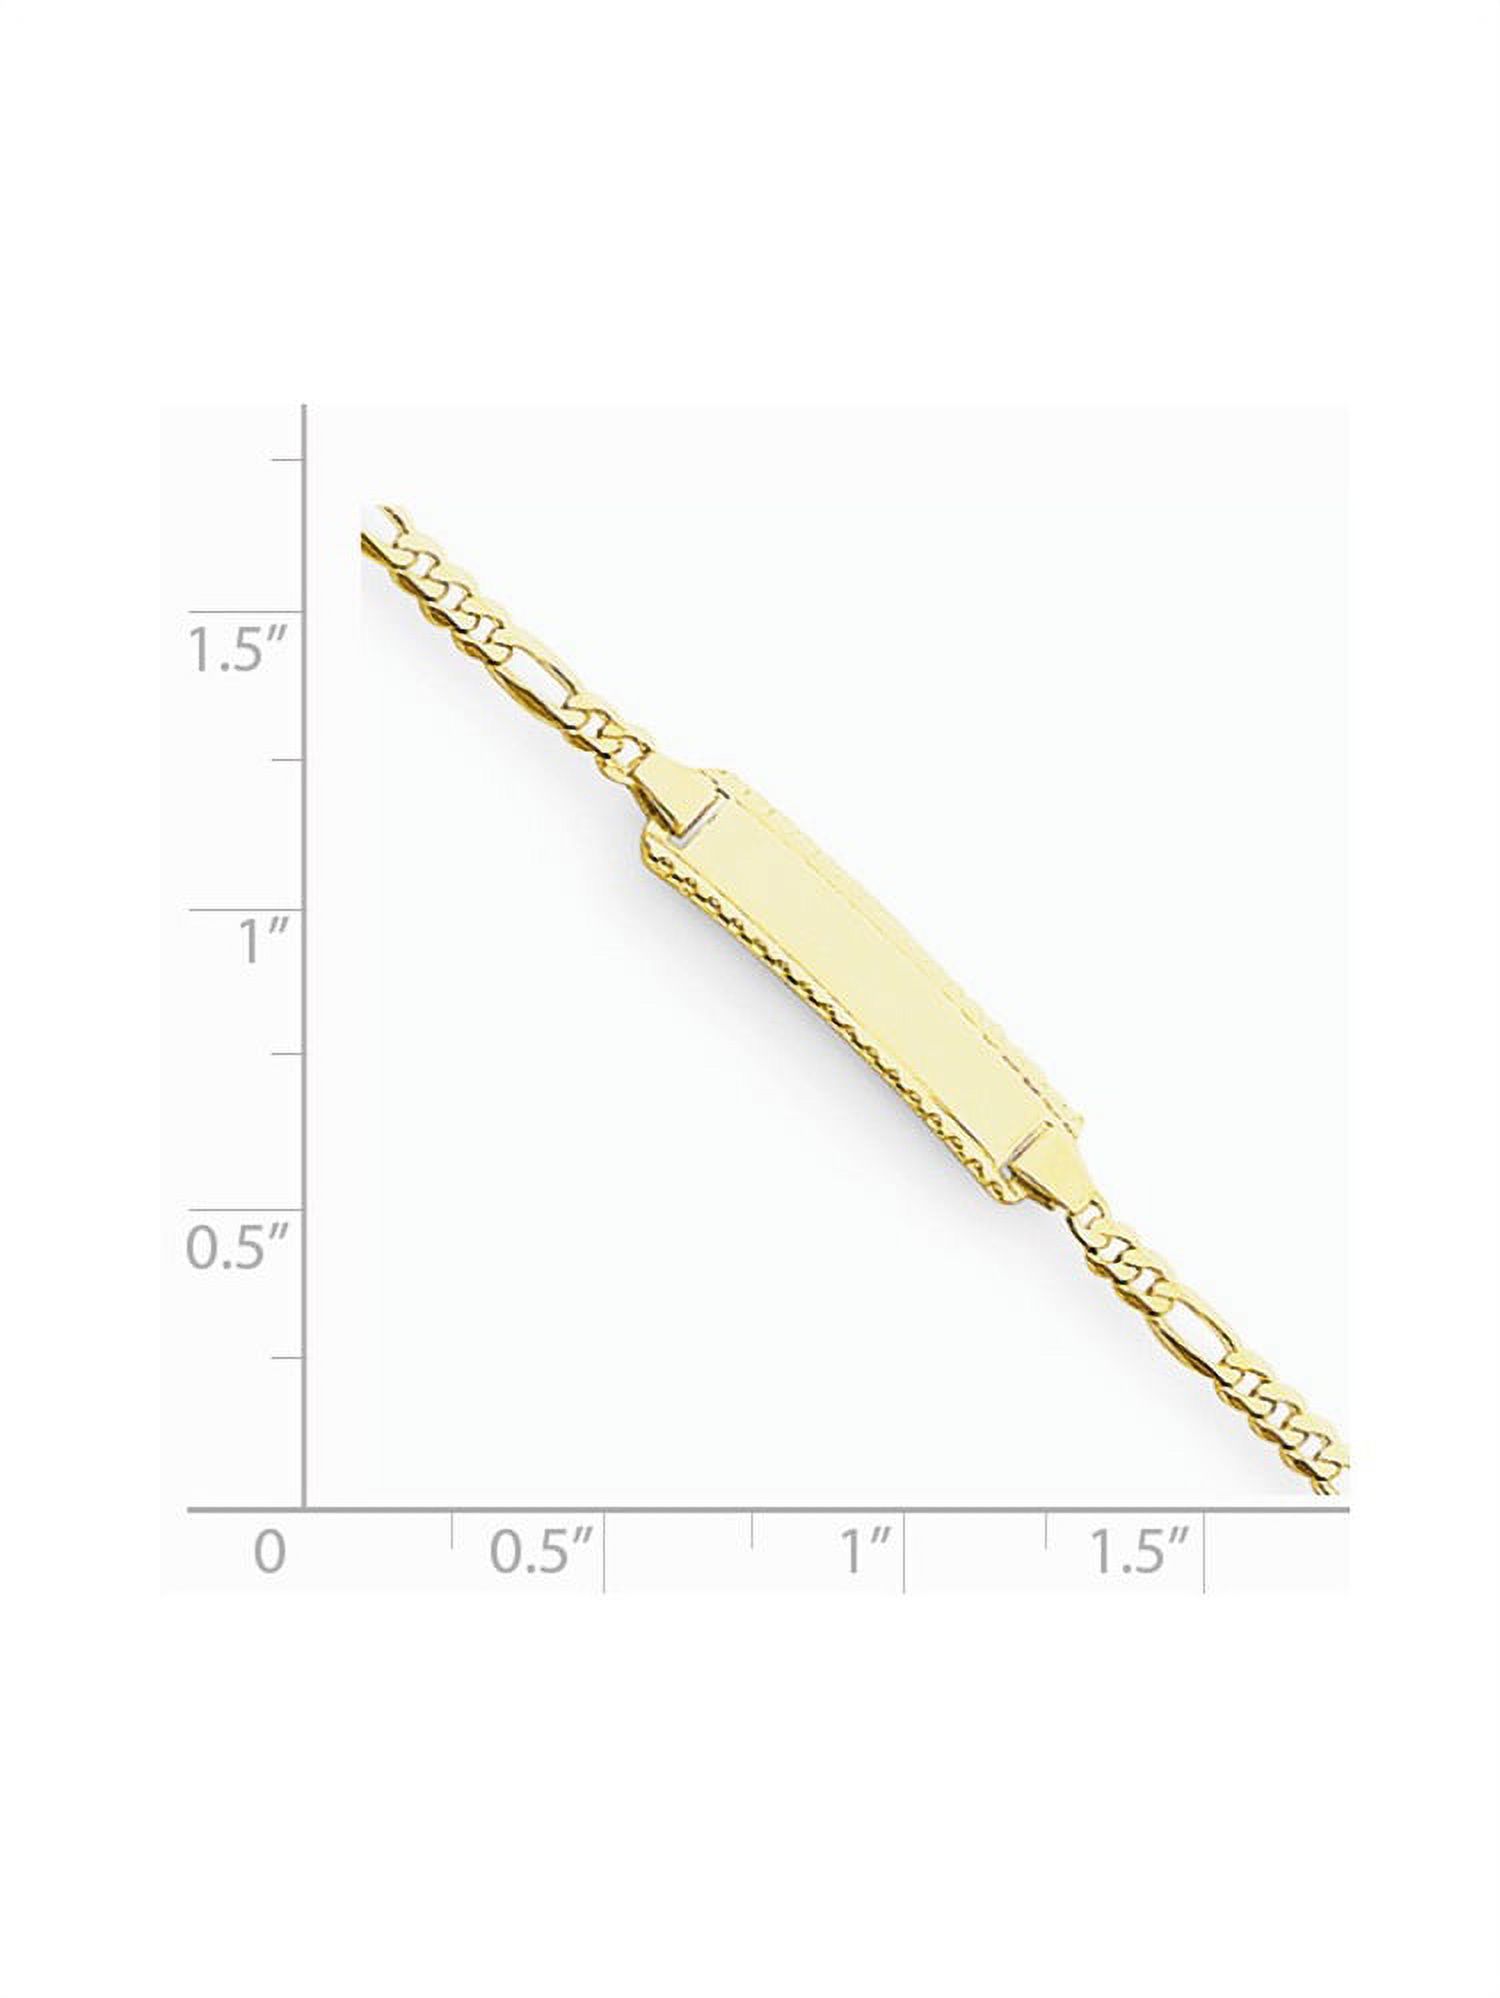 Gold　Figaro　6in　Baby　Link　Engraveable　Bracelet-　14k　ID　Yellow　Child